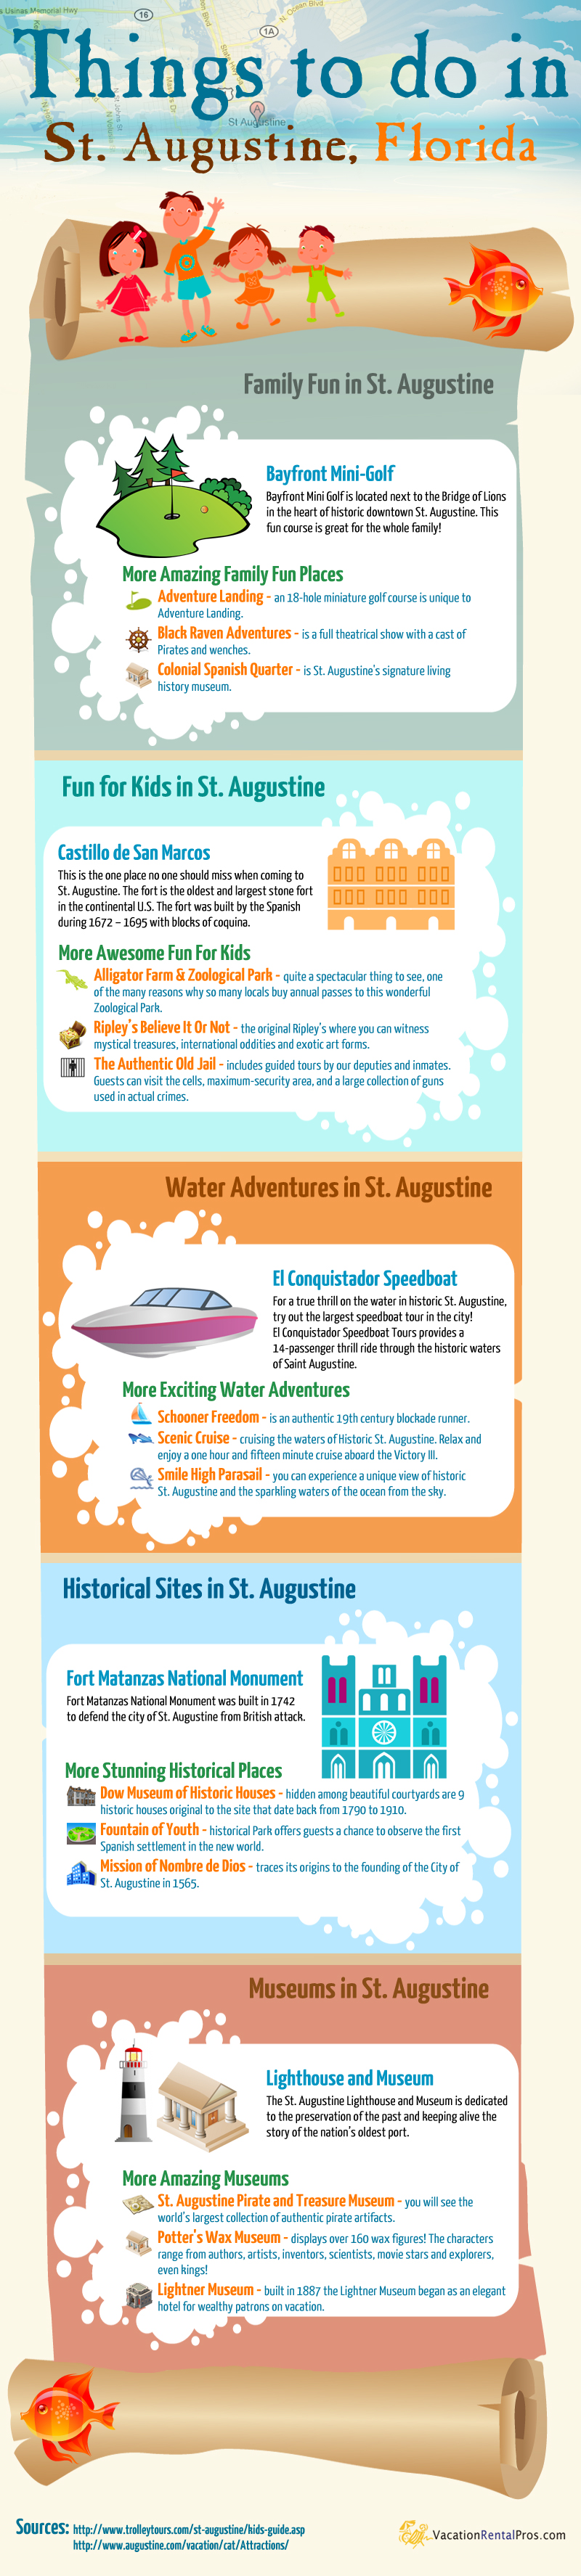 Top Things to Do in St. Augustine, Florida